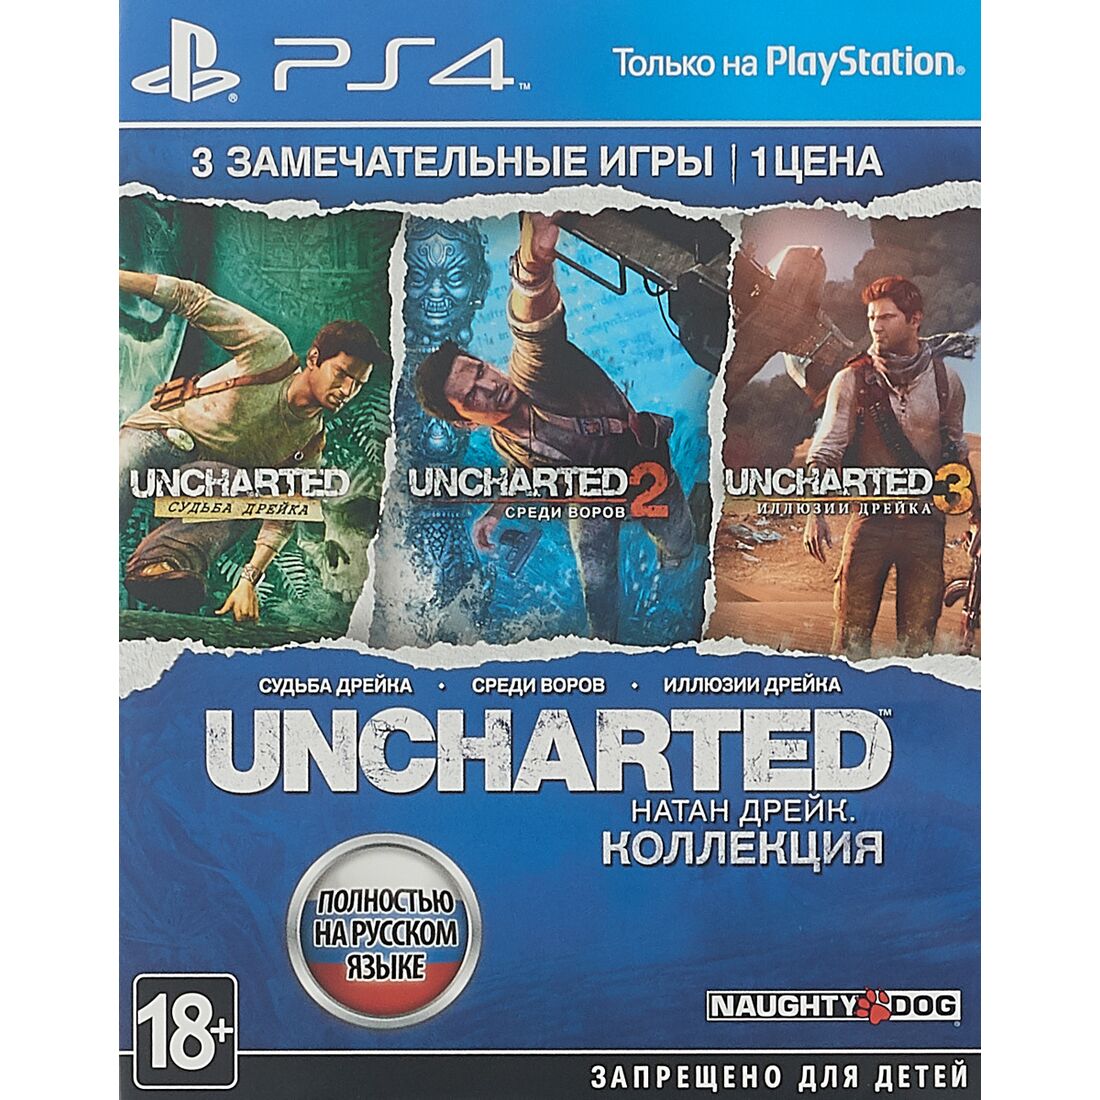 Игра uncharted collection. Анчартед трилогия пс4. Uncharted Nathan Drake collection ps4. Uncharted 4 ps4 диск.